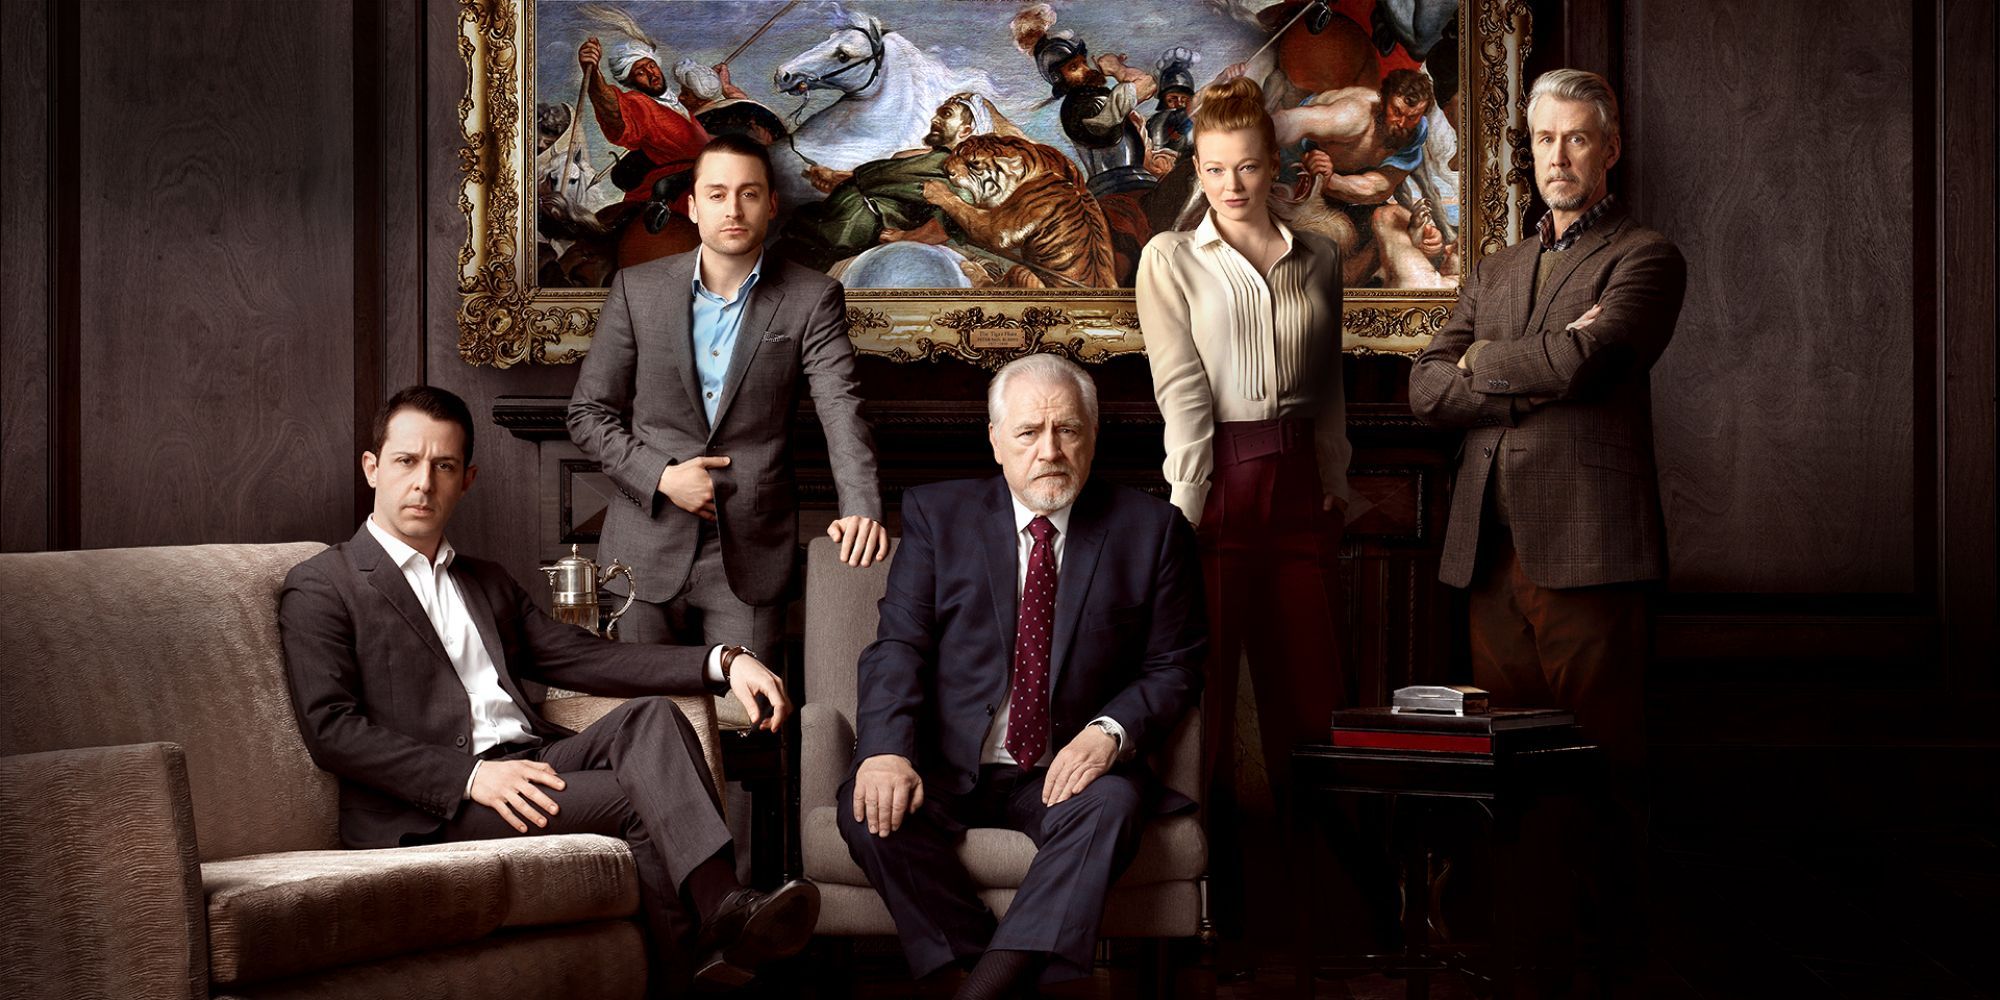 The Roy family posing together in a promo image for Succession